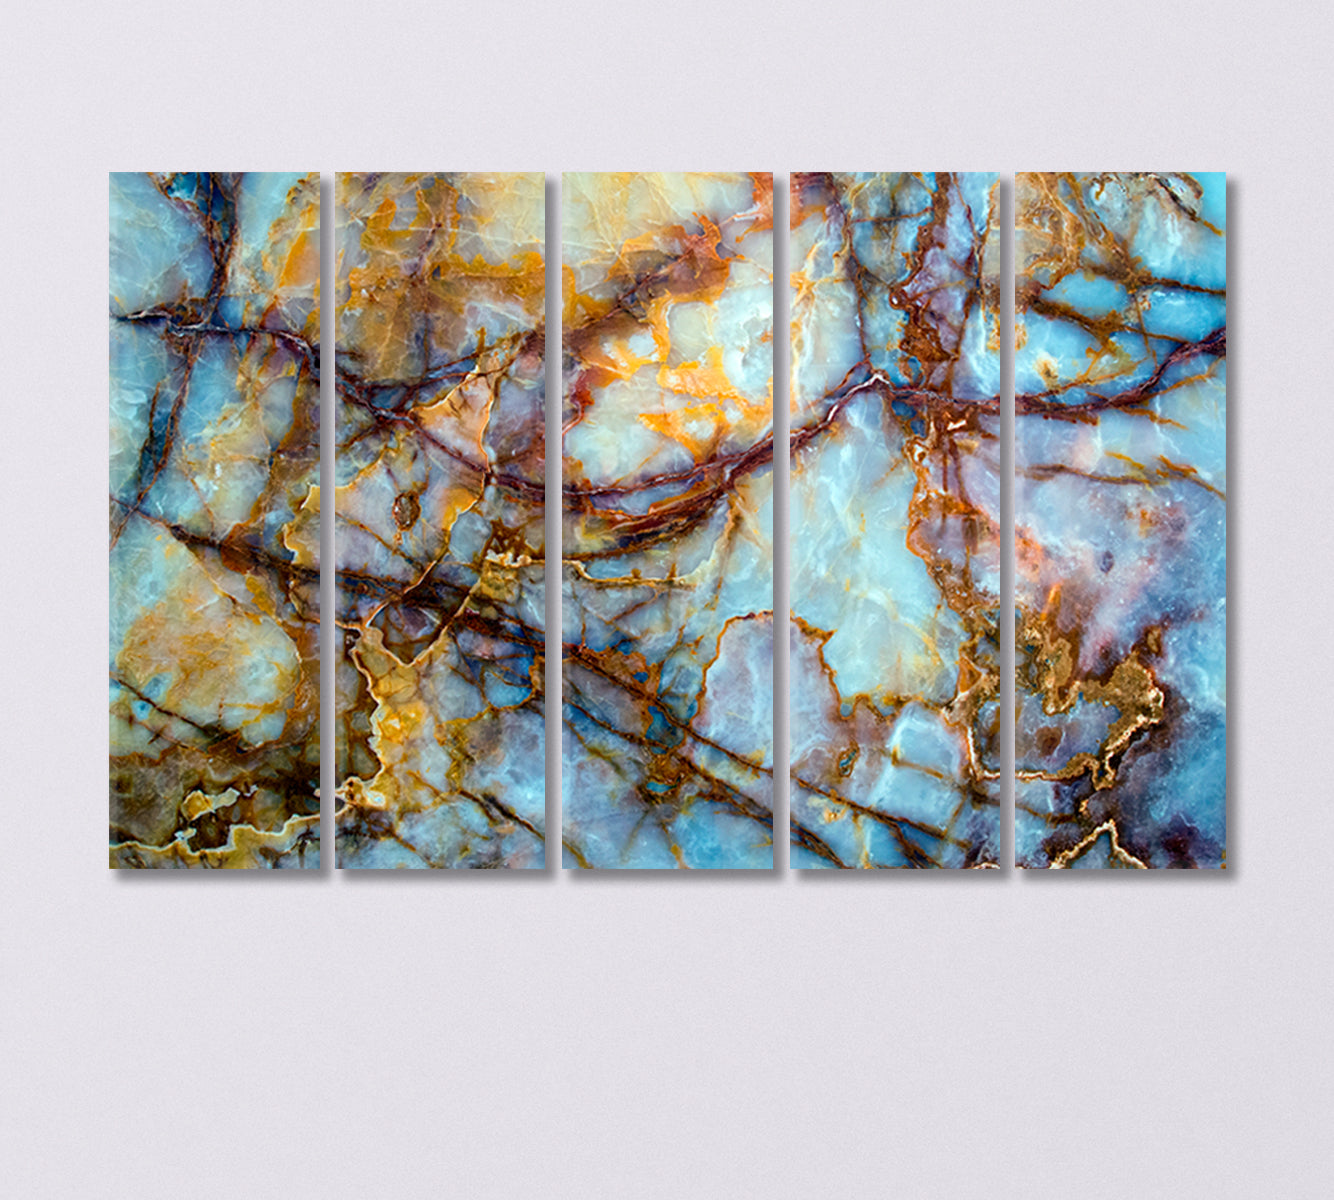 Blue and Gold Onyx Marble Stone Canvas Print-Canvas Print-CetArt-5 Panels-36x24 inches-CetArt